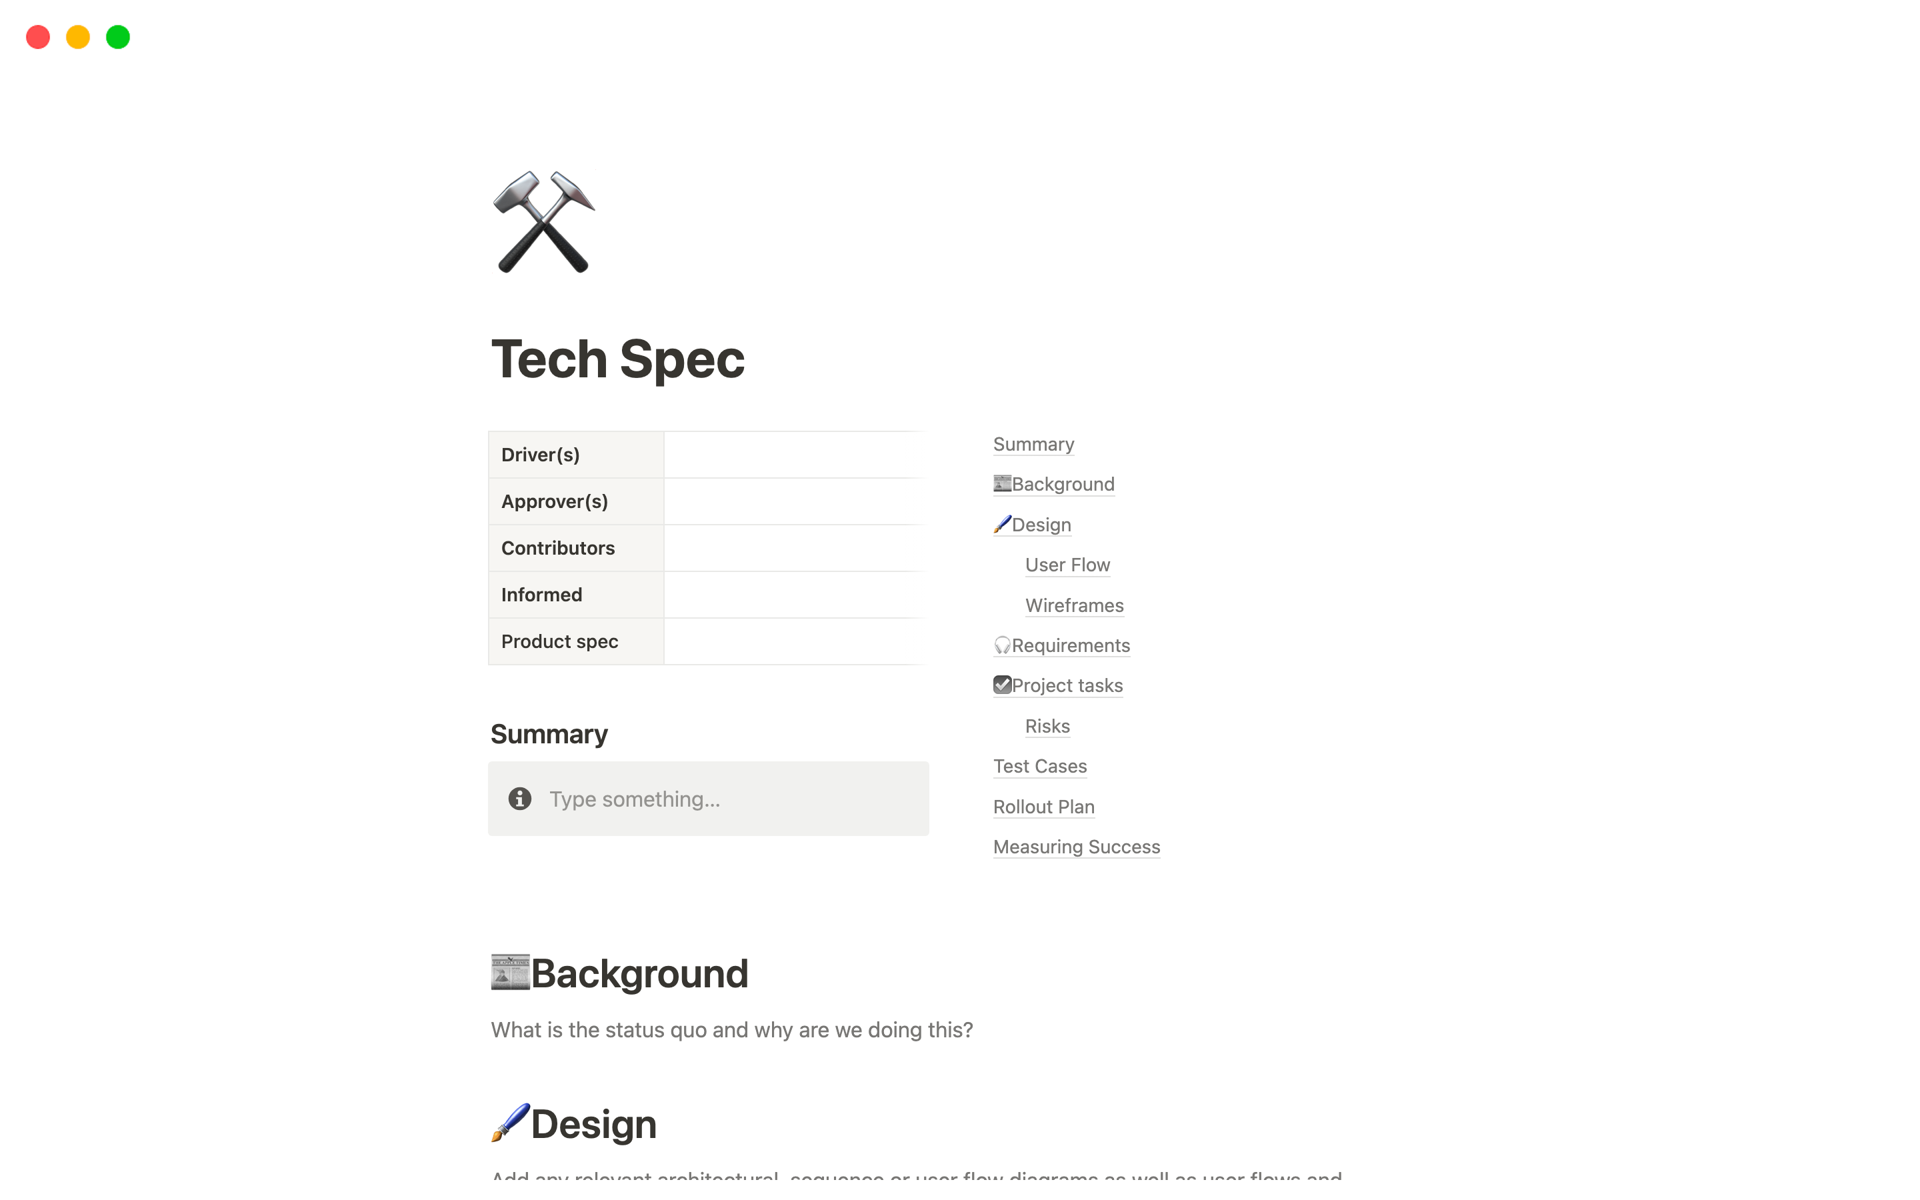 Screenshot of Best 10 Engineering Tech Spec Templates for Computer Engineers collection by Notion